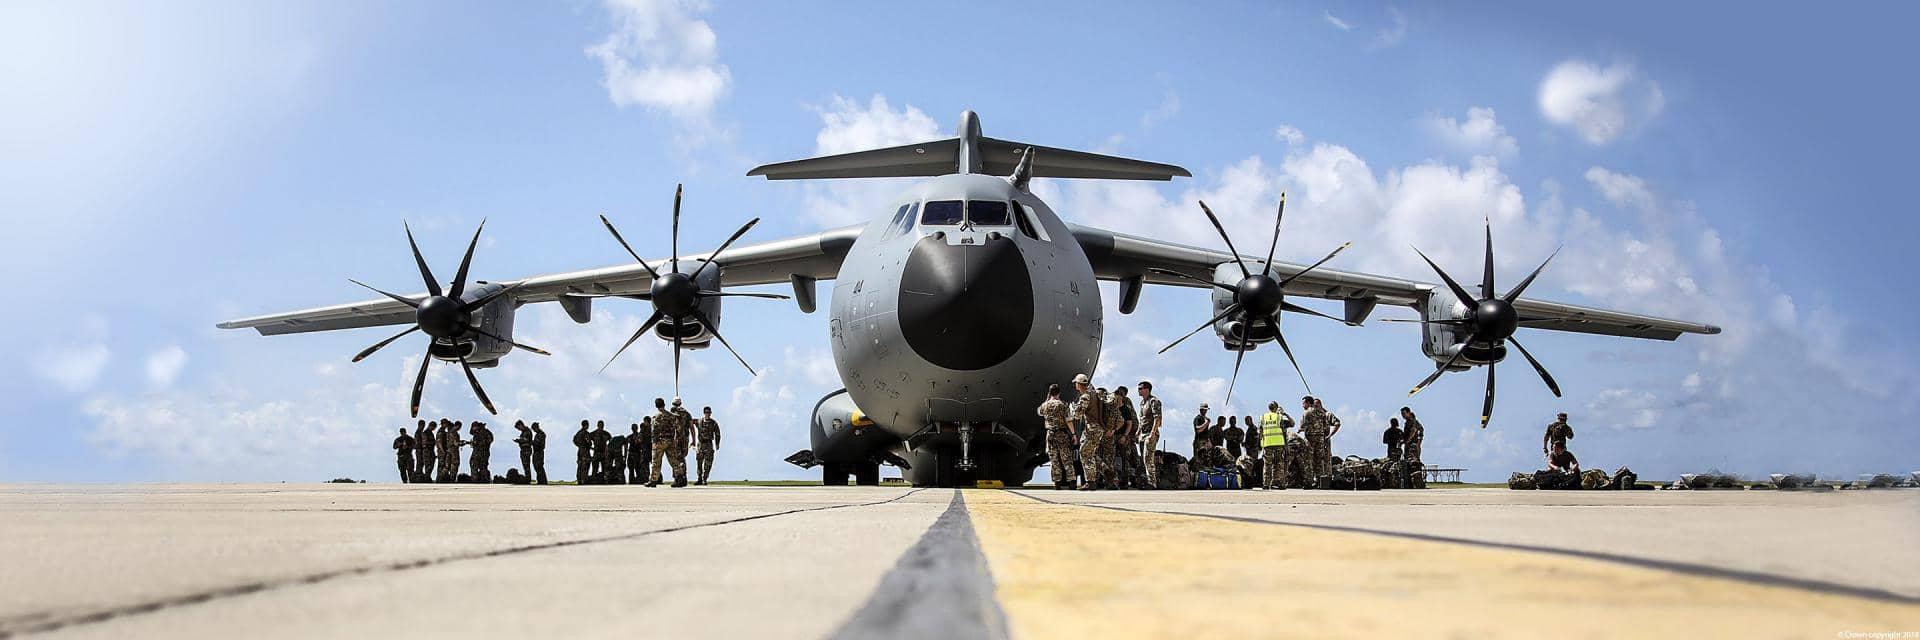 A military airplane on a runway with troops and kit assembled under both wings
